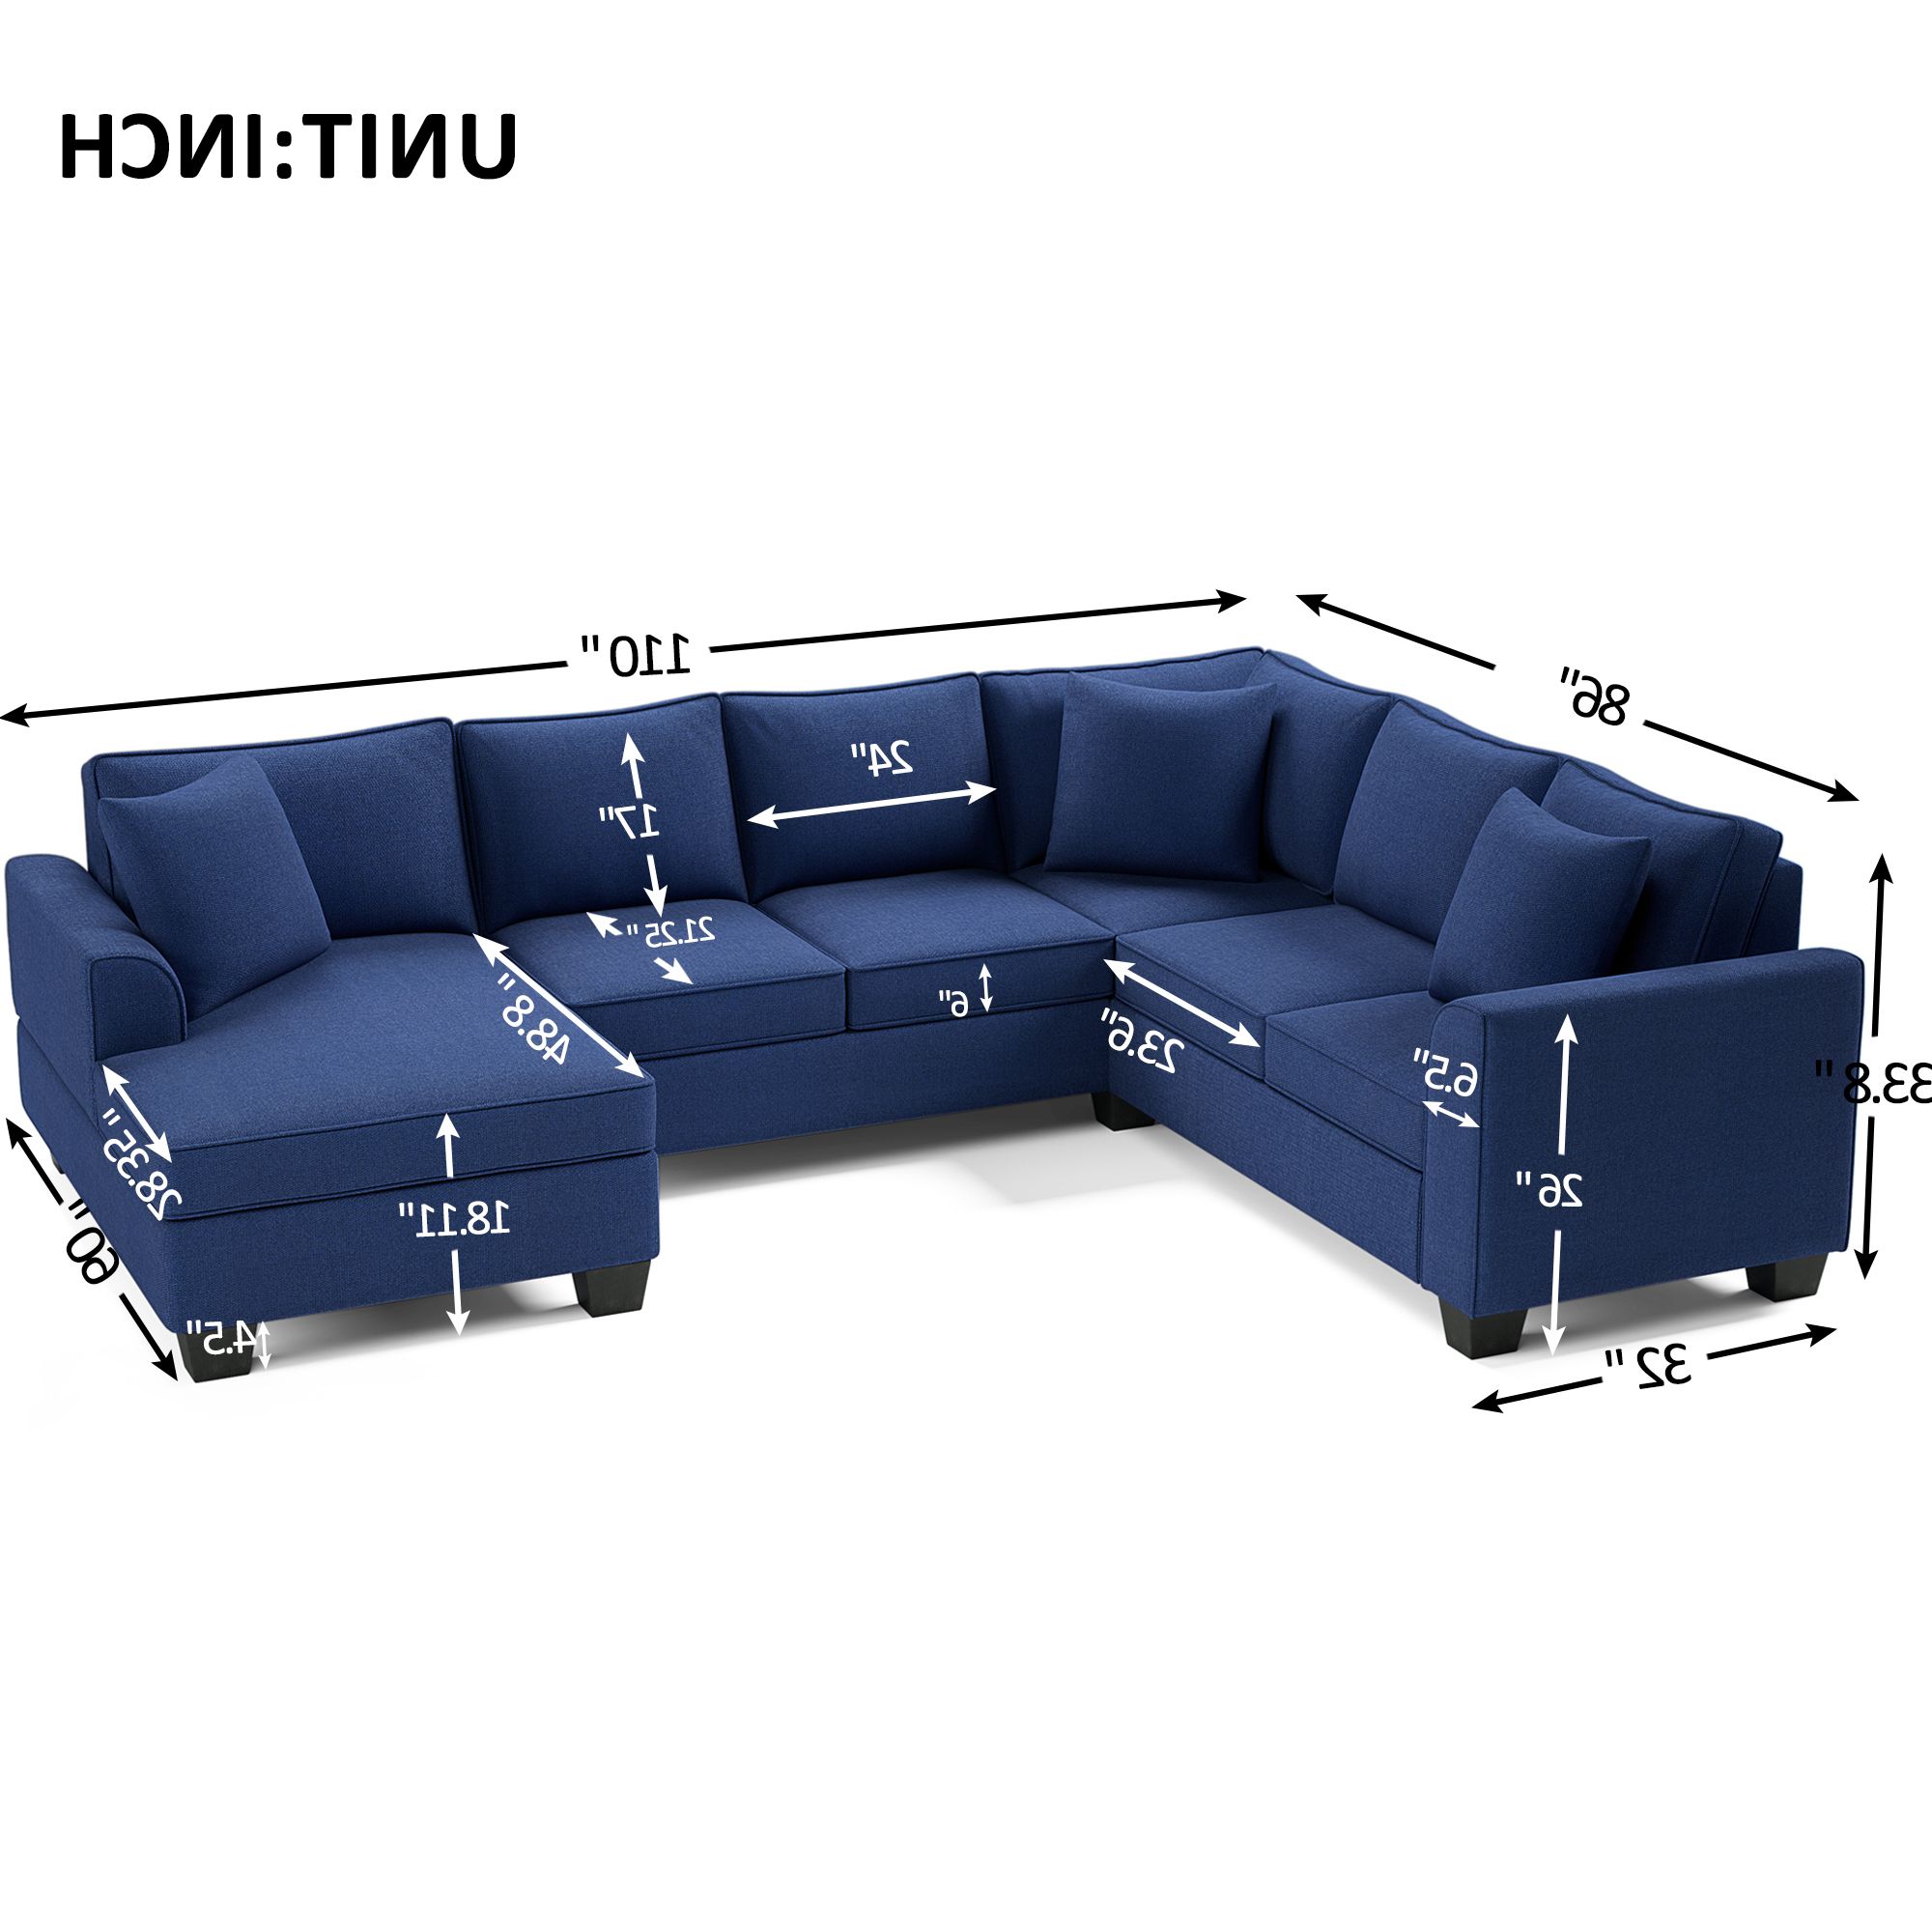 Modern 7 Seat Sectional Sofa, Polyester Sectional Sofas With 3 Pillows For  Living Room, 3 Colors – Walmart Pertaining To 7 Seater Sectional Couch With Ottoman And 3 Pillows (View 18 of 20)